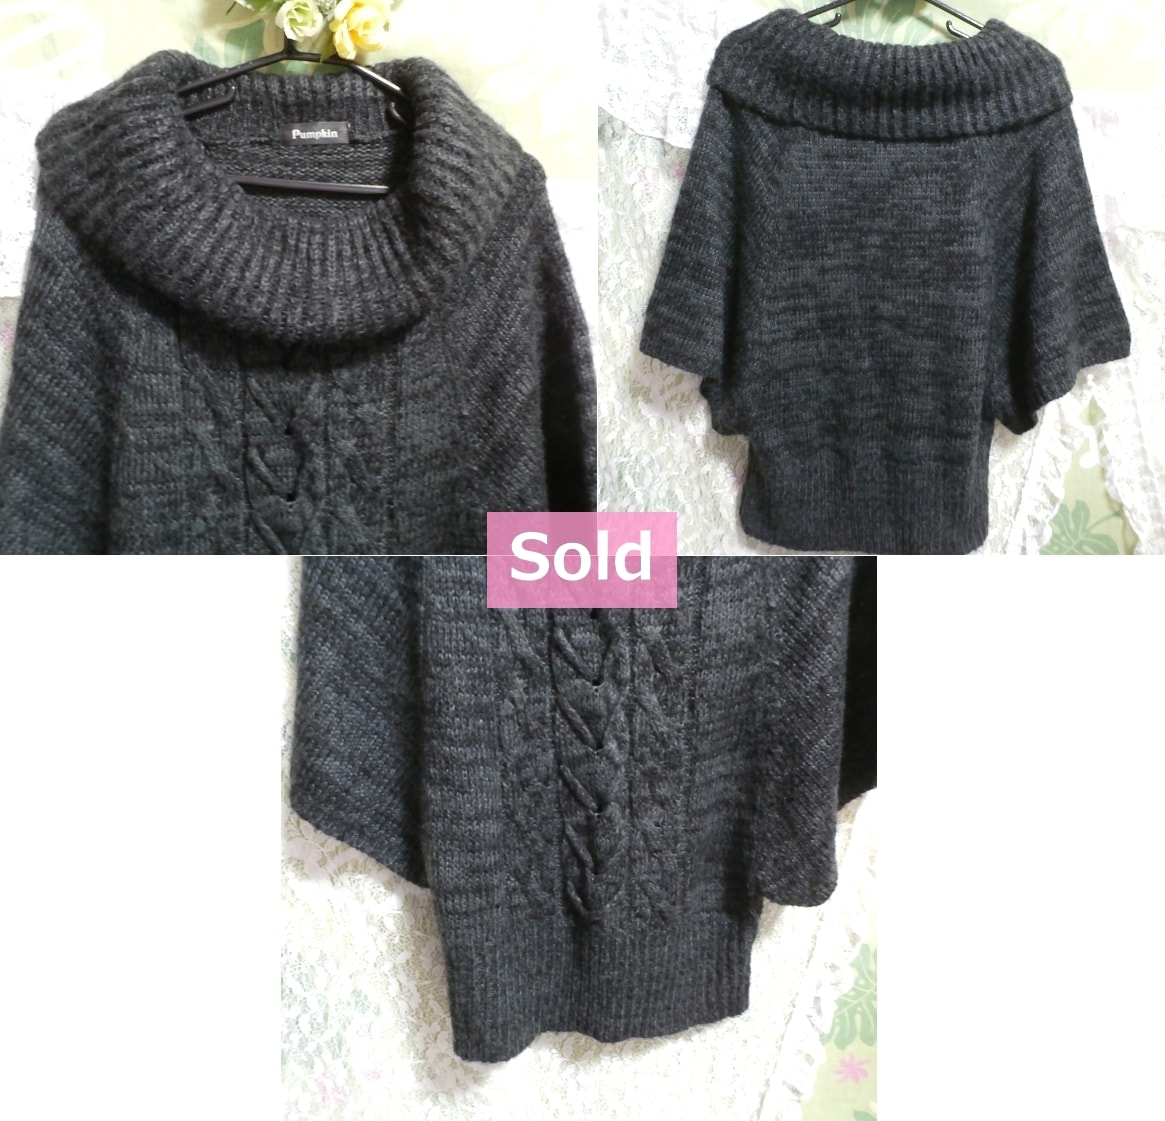 Poncho style poilu gris foncé / pull / tricot / hauts, tricot, pull & manches longues & taille M